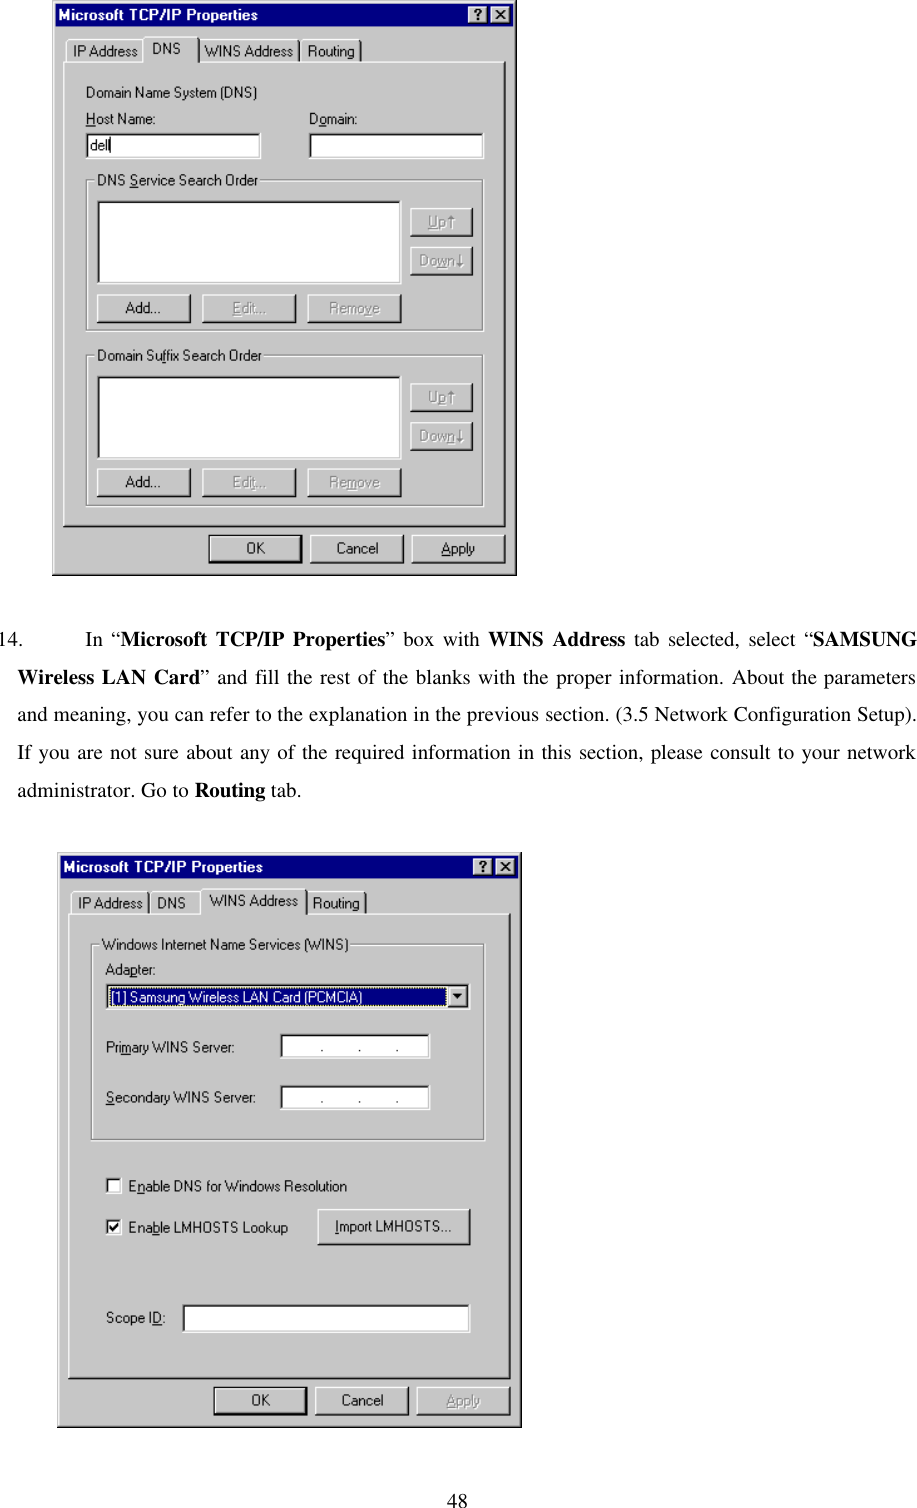  48             14. In “Microsoft TCP/IP Properties” box with WINS Address tab selected, select “SAMSUNG Wireless LAN Card” and fill the rest of the blanks with the proper information. About the parameters and meaning, you can refer to the explanation in the previous section. (3.5 Network Configuration Setup). If you are not sure about any of the required information in this section, please consult to your network administrator. Go to Routing tab.               